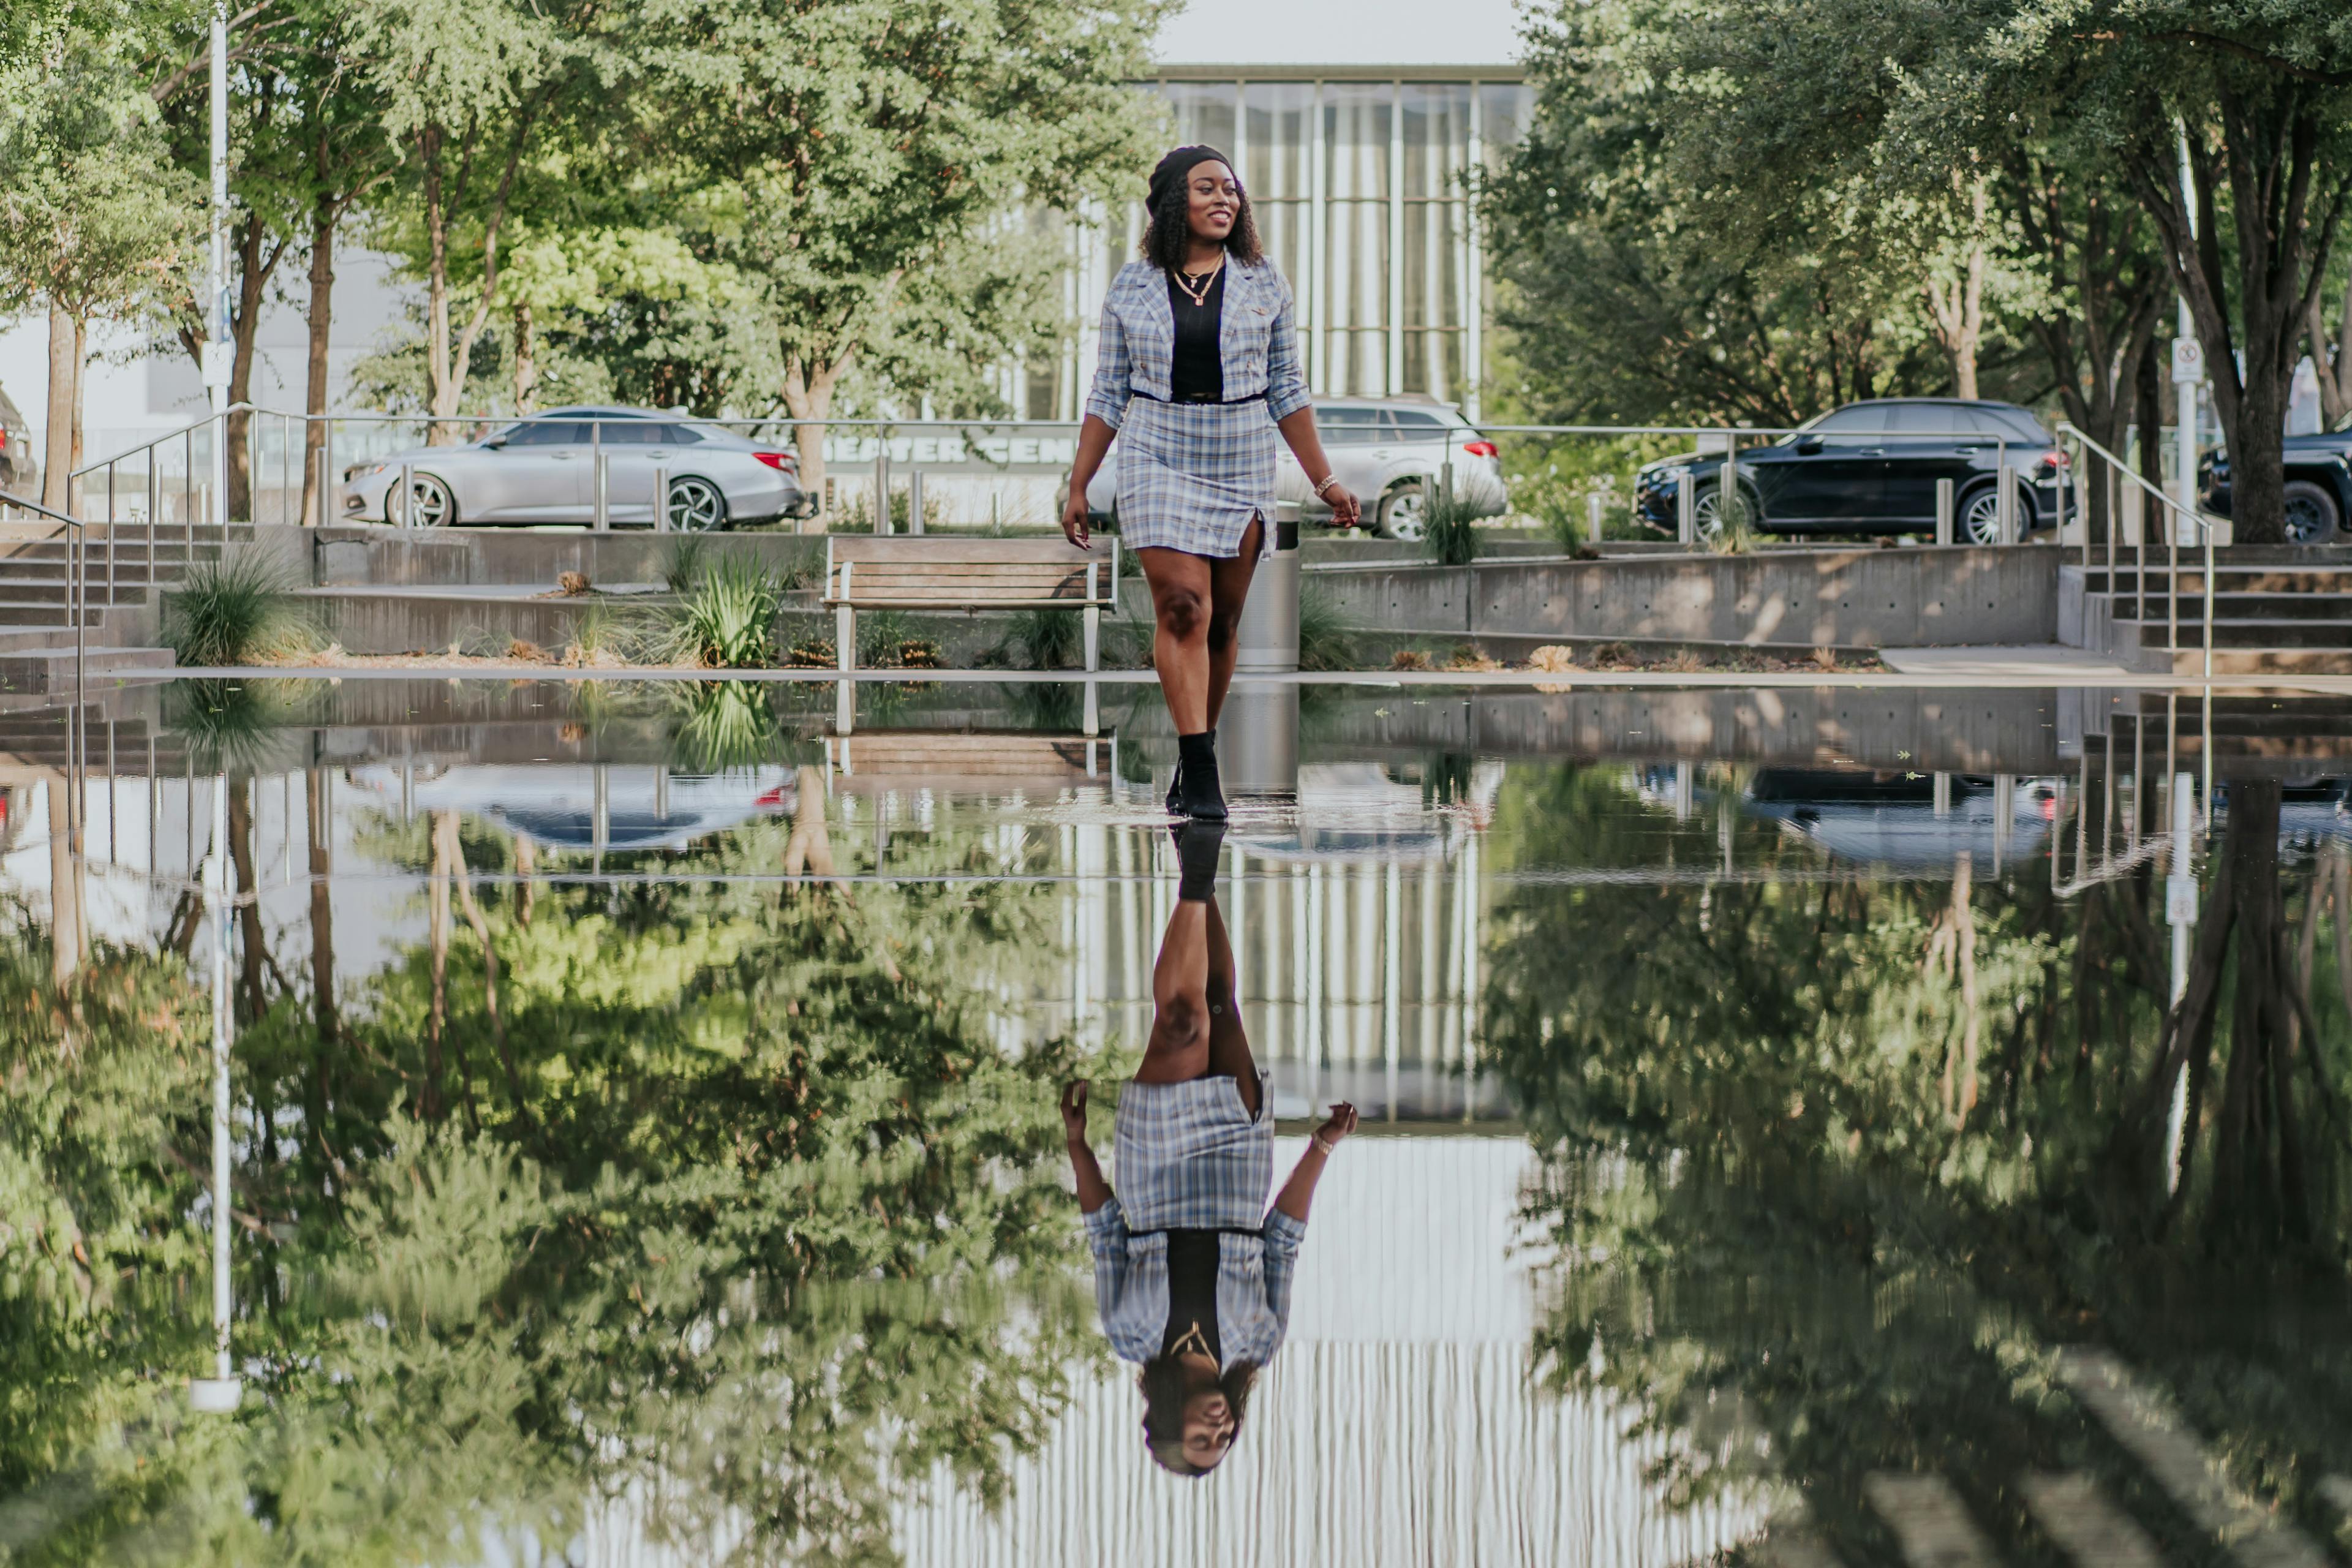 A woman smiling as she walks across a shallow reflecting pool with trees and cars in the background.